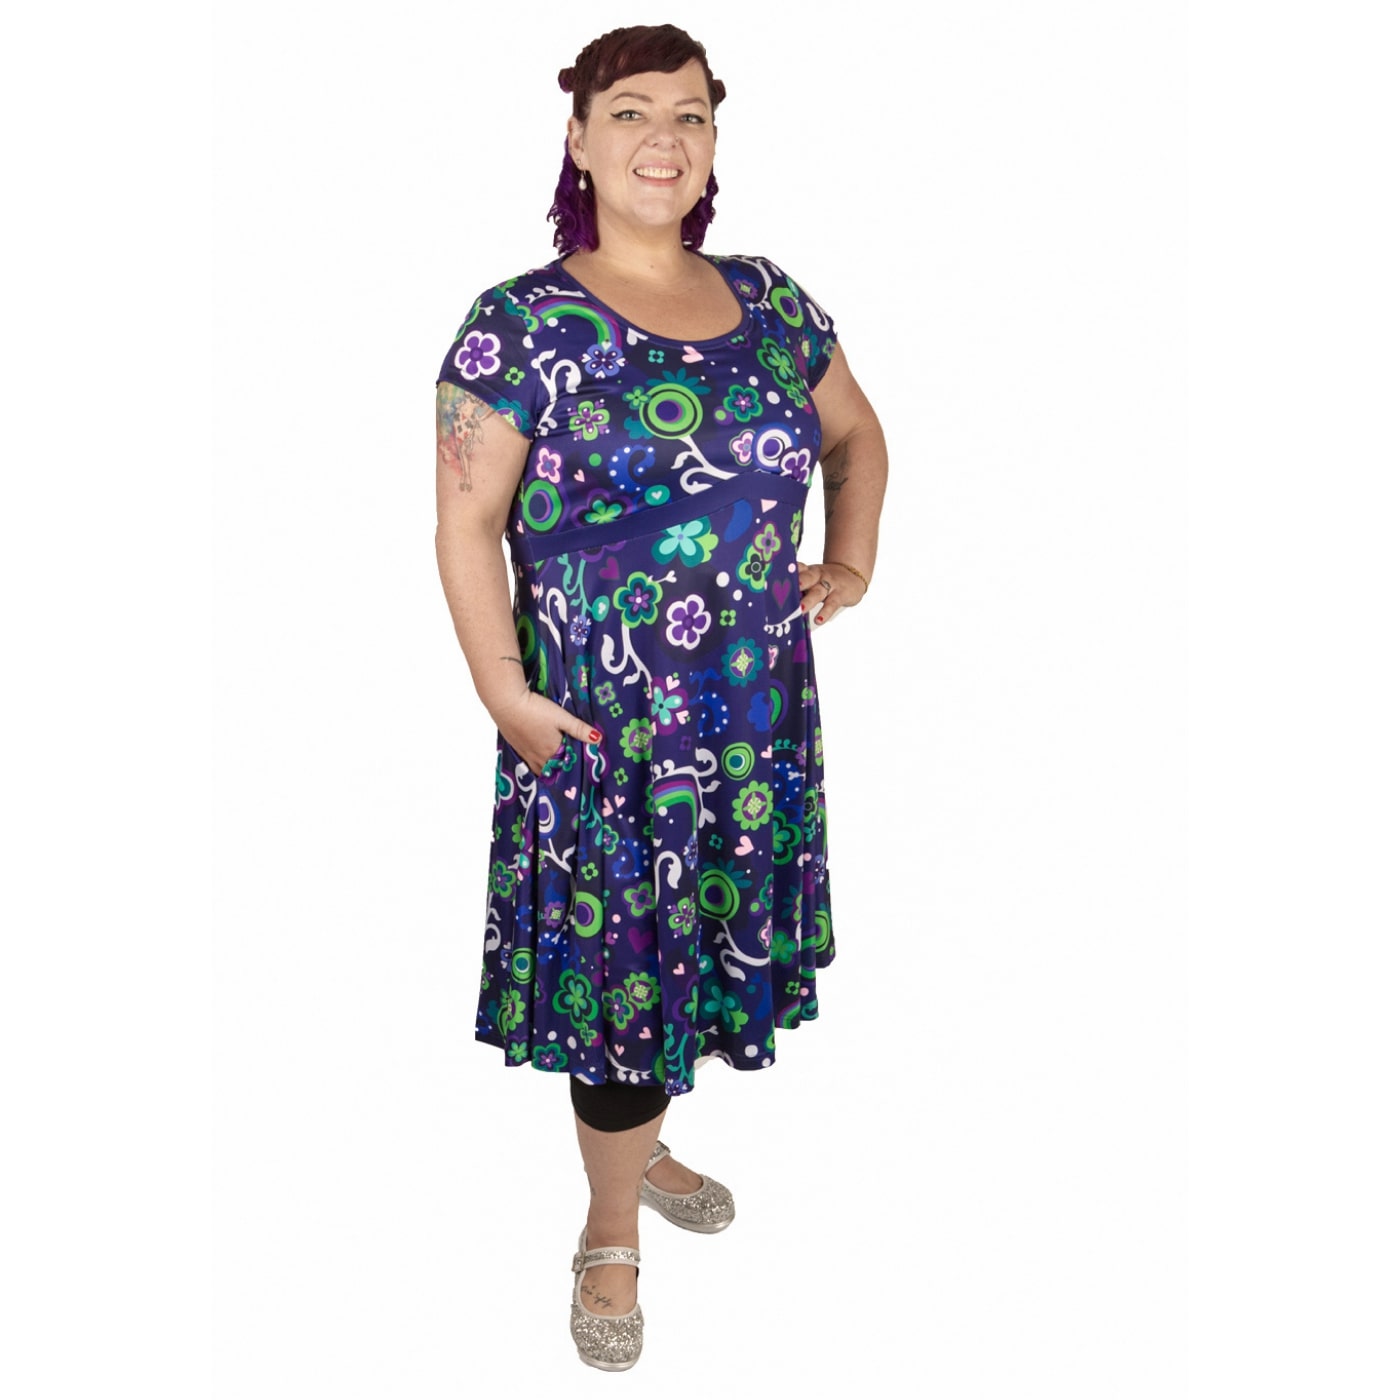 Groovy Enchantment Tea Dress by RainbowsAndFairies.com.au (Psychedelic - Woodstock - Green & Purple - Kitsch - Dress With Pockets - Vintage Inspired) - SKU: CL_TEADR_GROOV_ENT - Pic-07